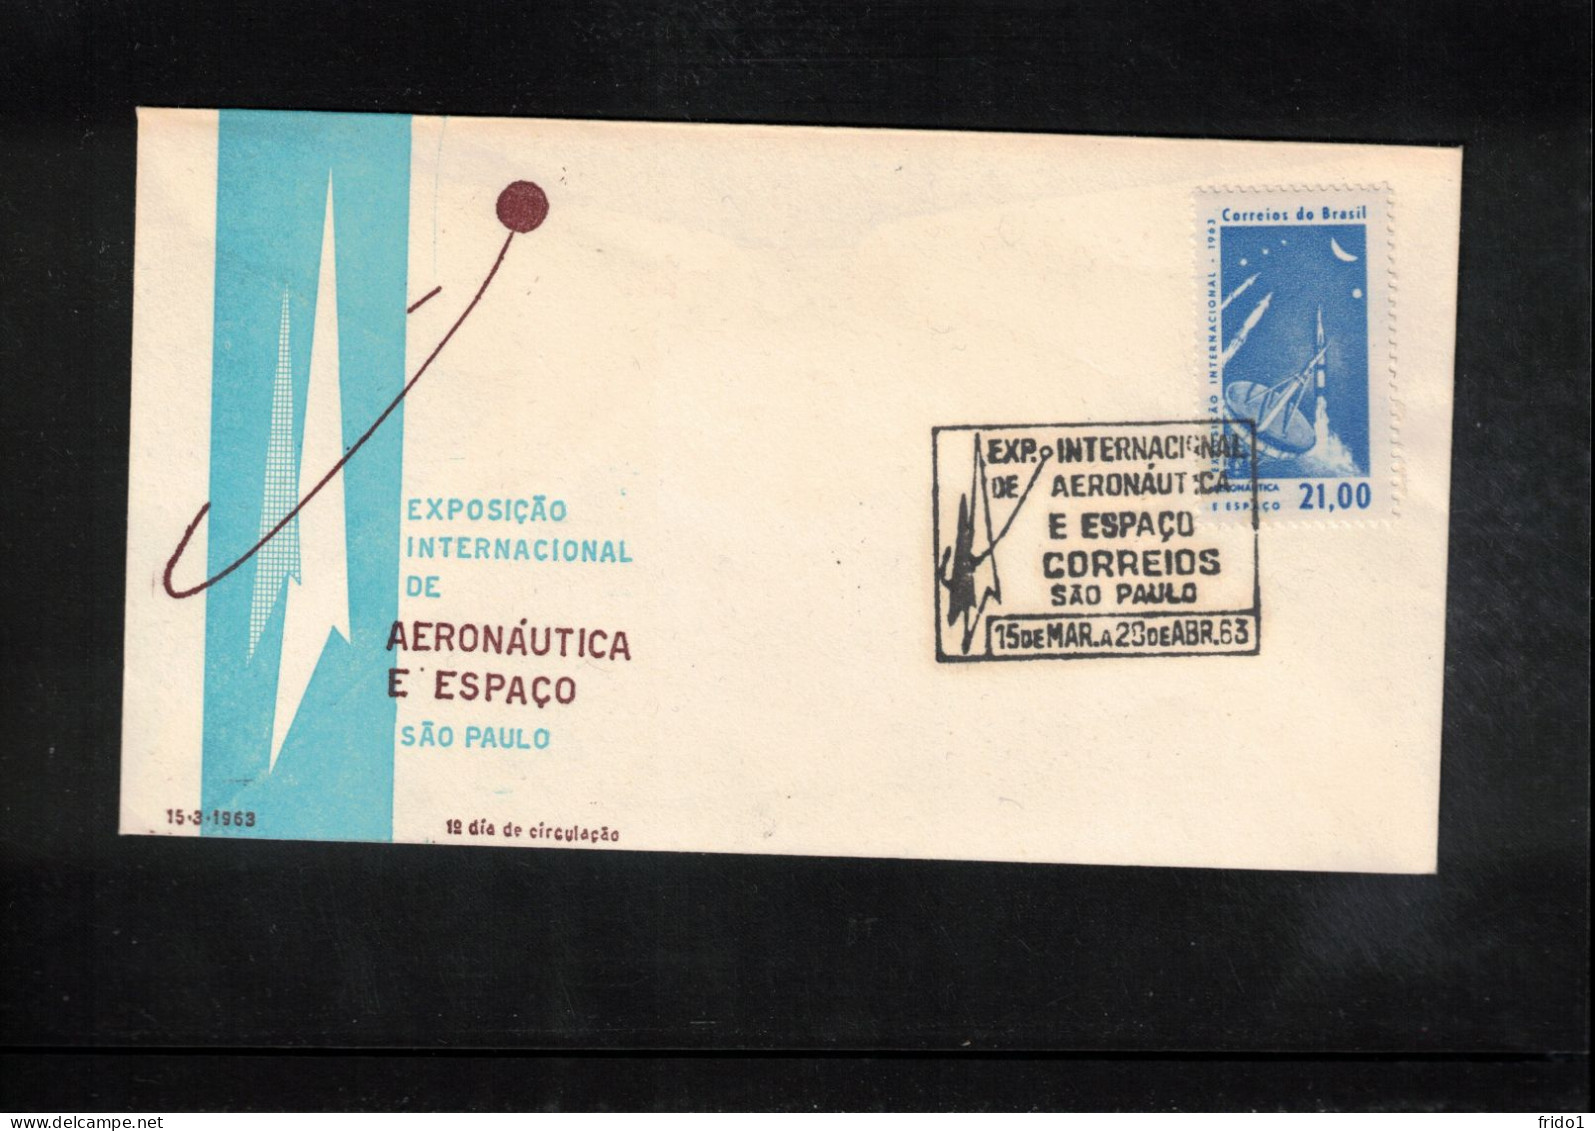 Brasil 1963 Space / Weltraum International Aeronautical Exhibition + Space Interesting Cover FDC - South America